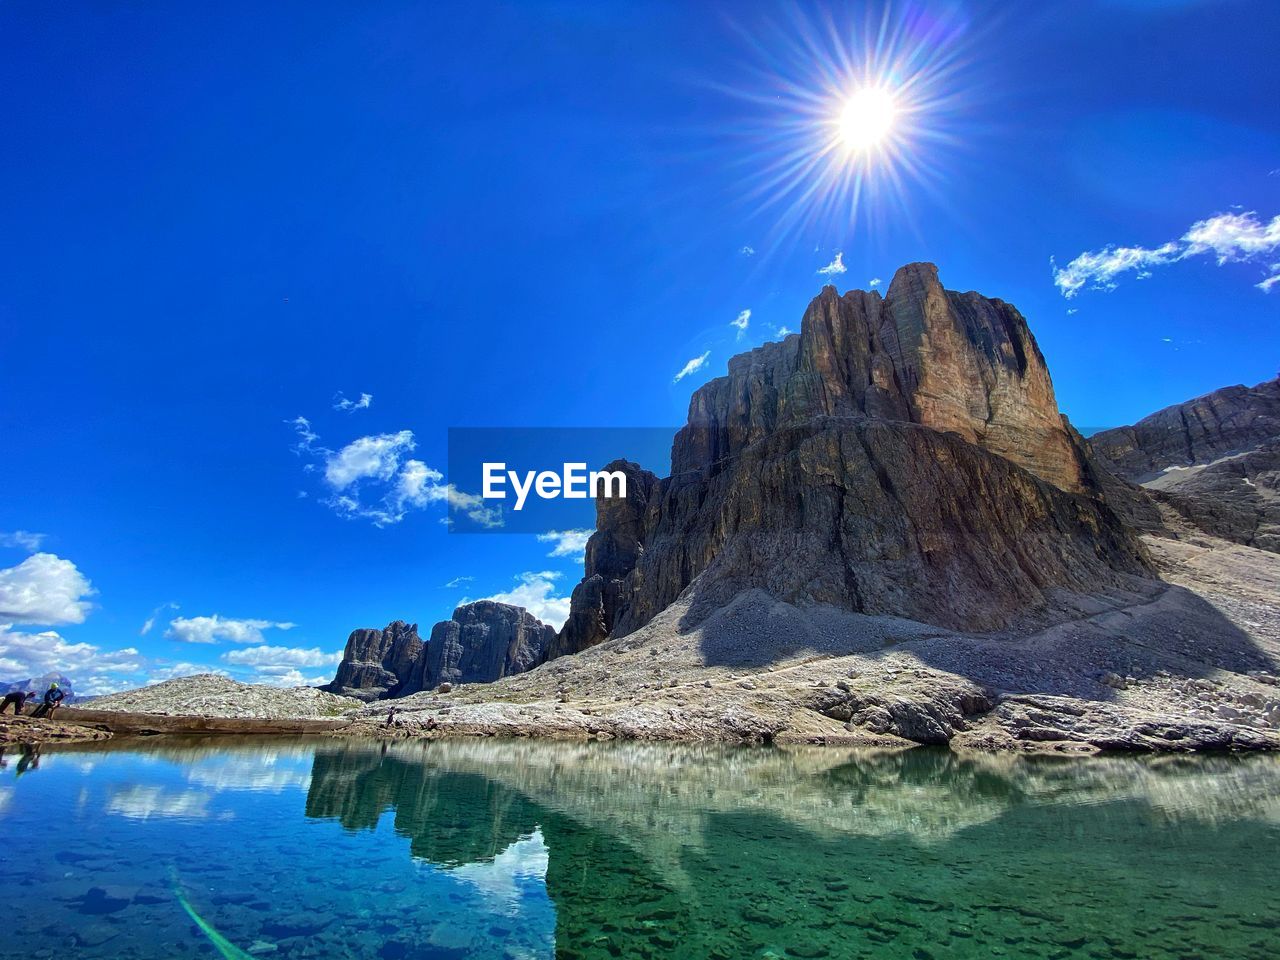 Mountain lake on dolomites - rock formations against blue sky